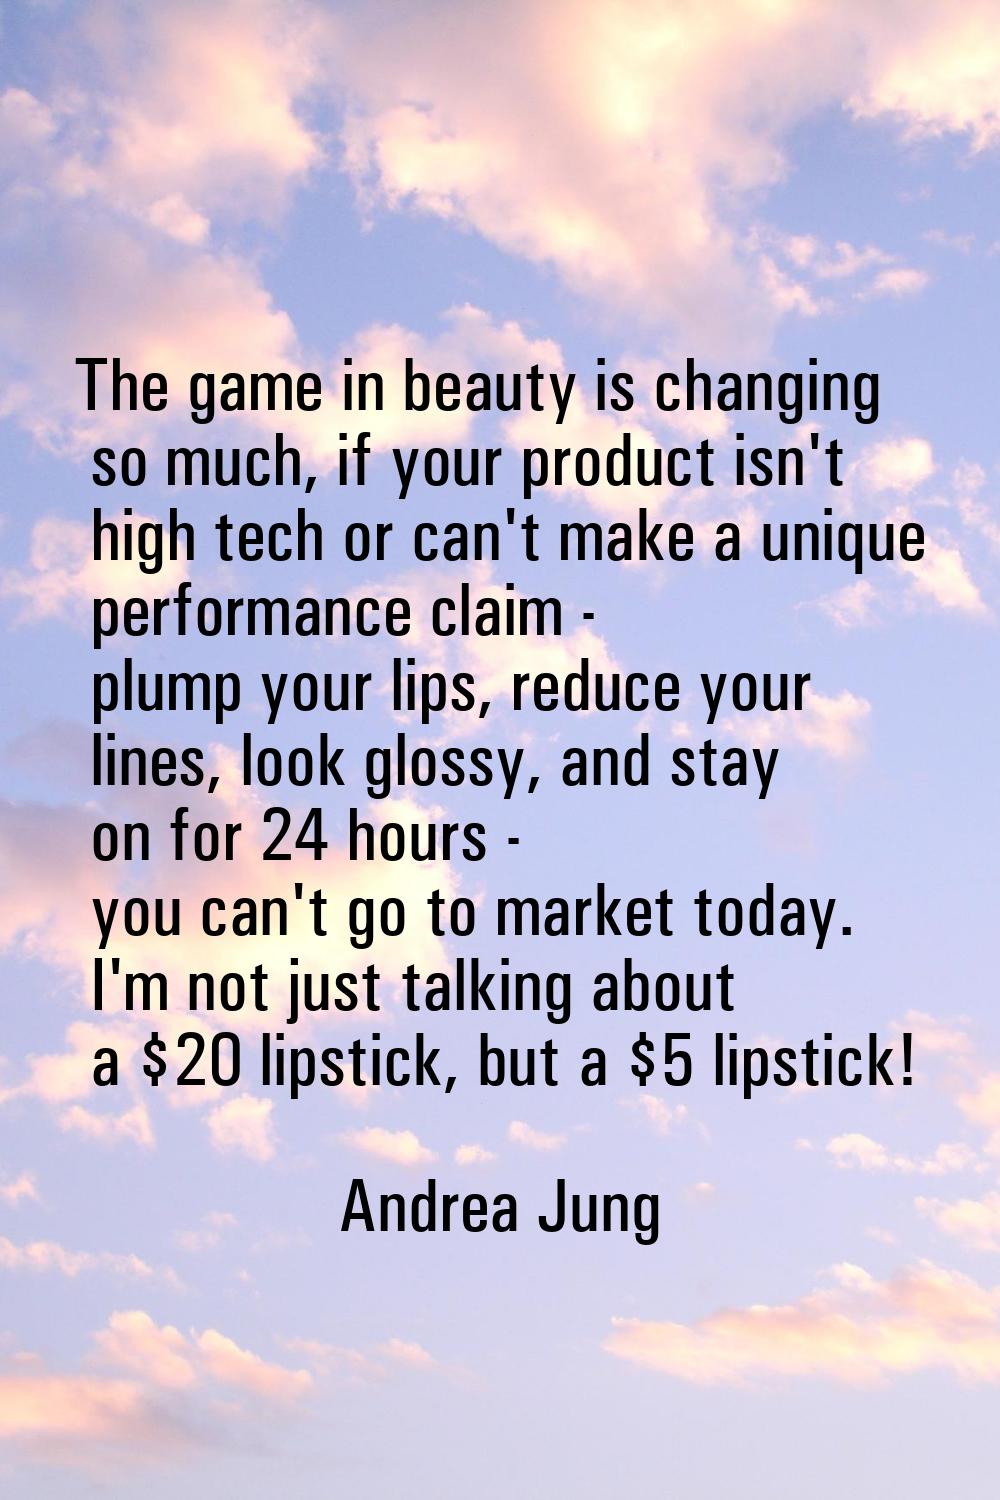 The game in beauty is changing so much, if your product isn't high tech or can't make a unique perf